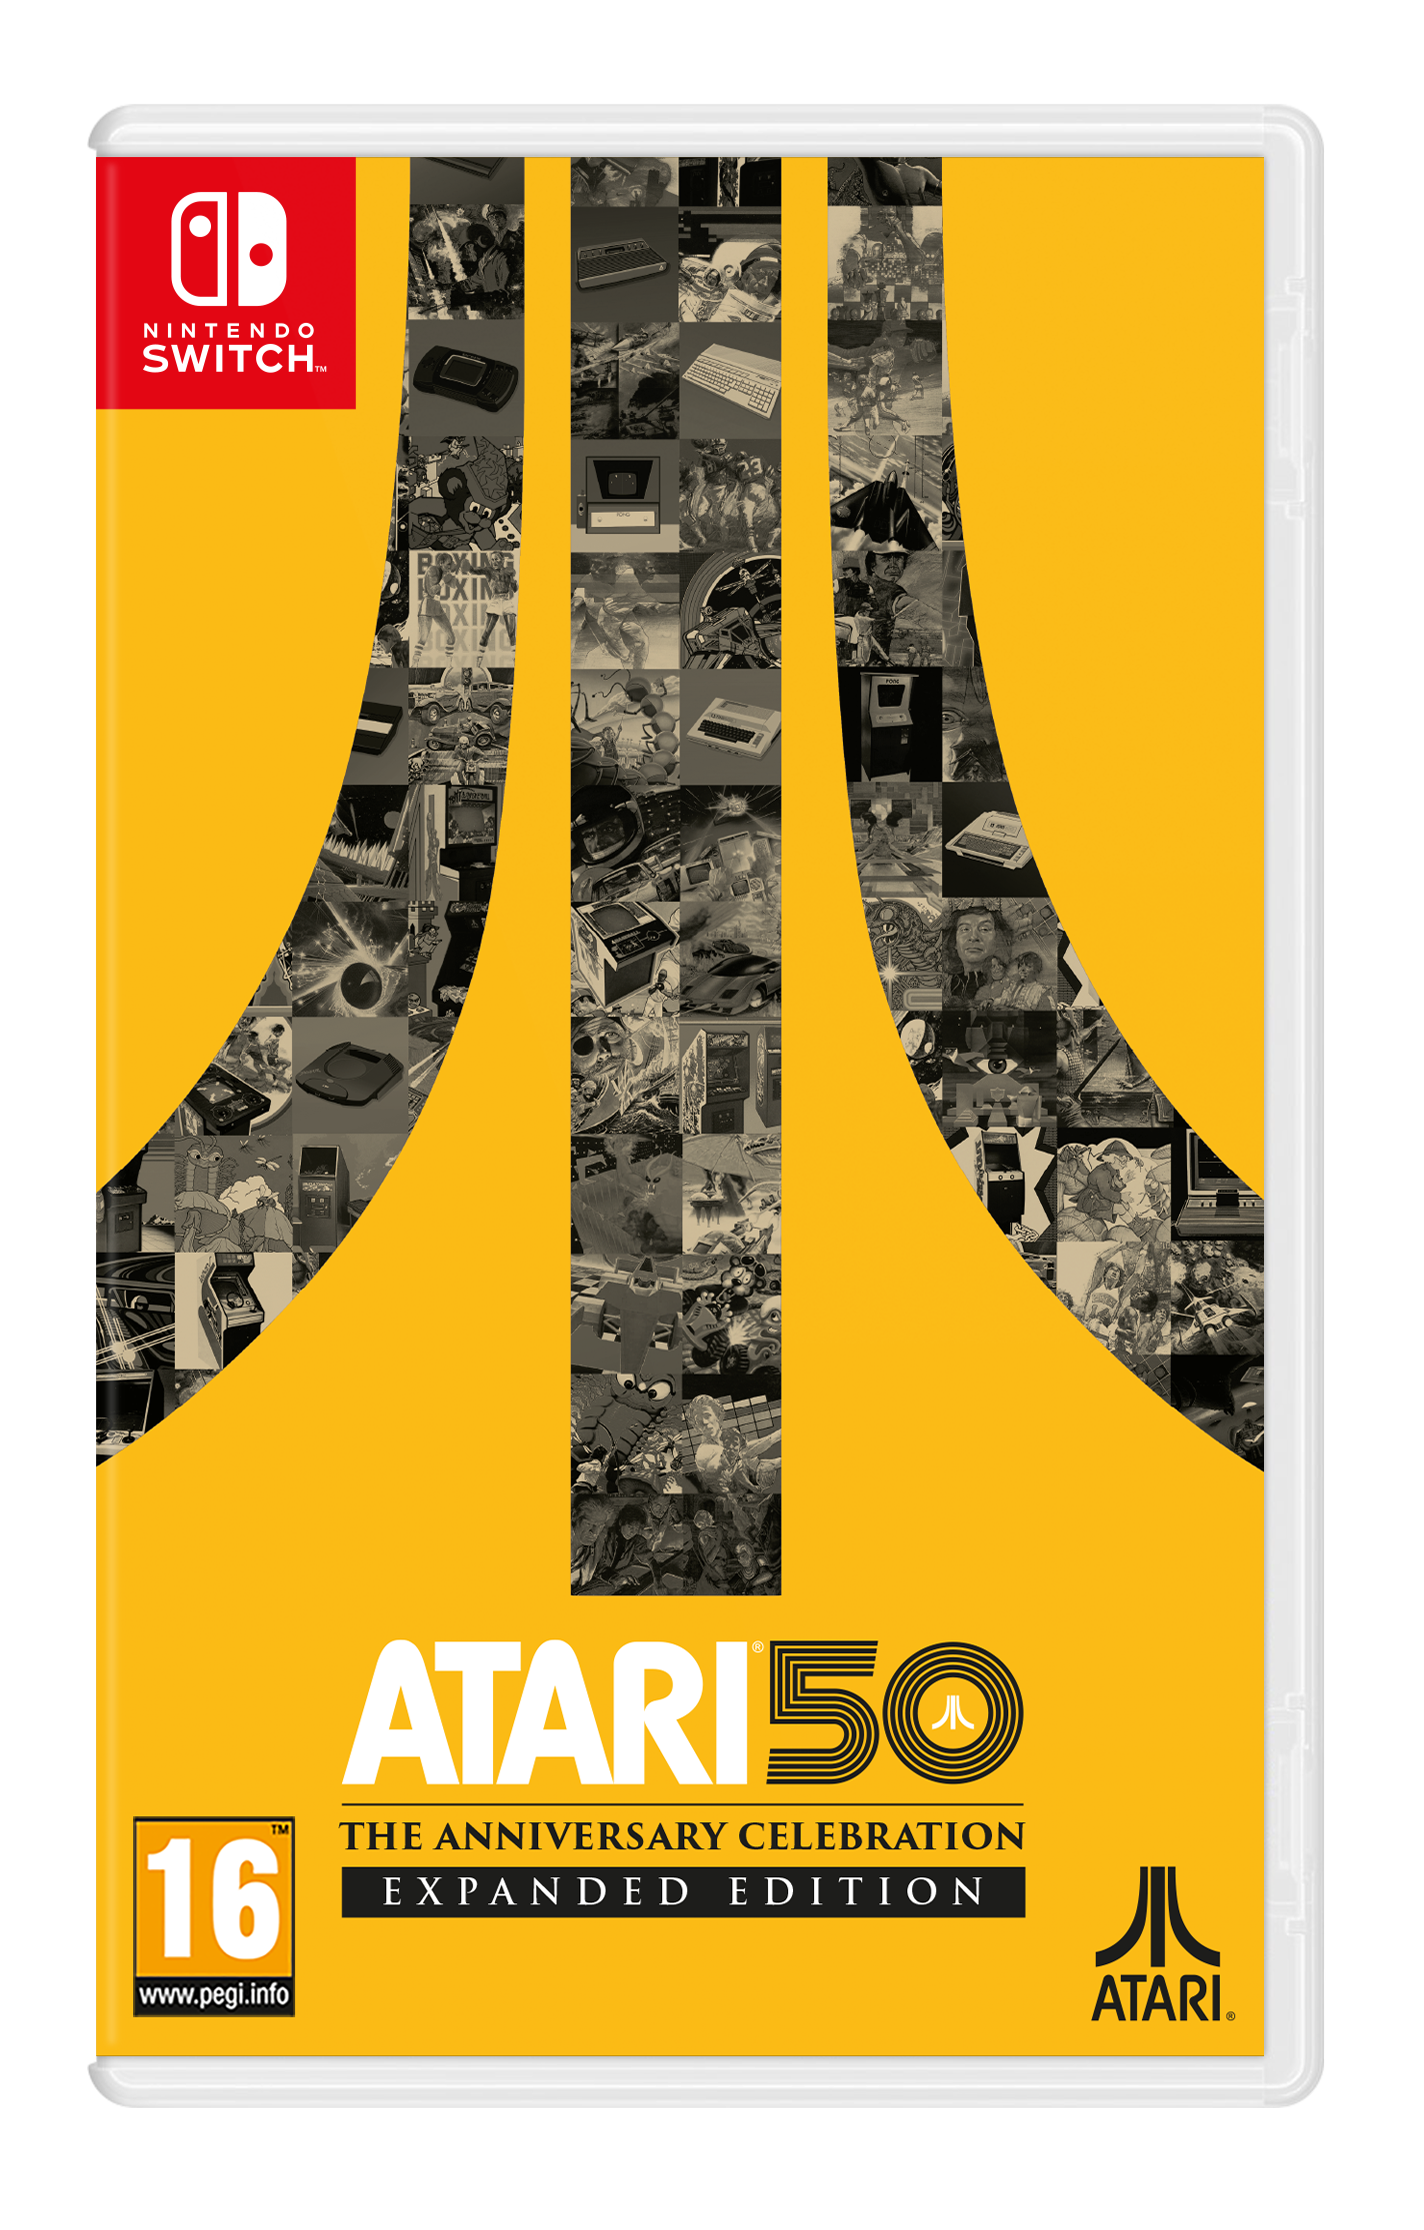 Atari 50: The Anniversary Celebration Expended Edition SWITCH